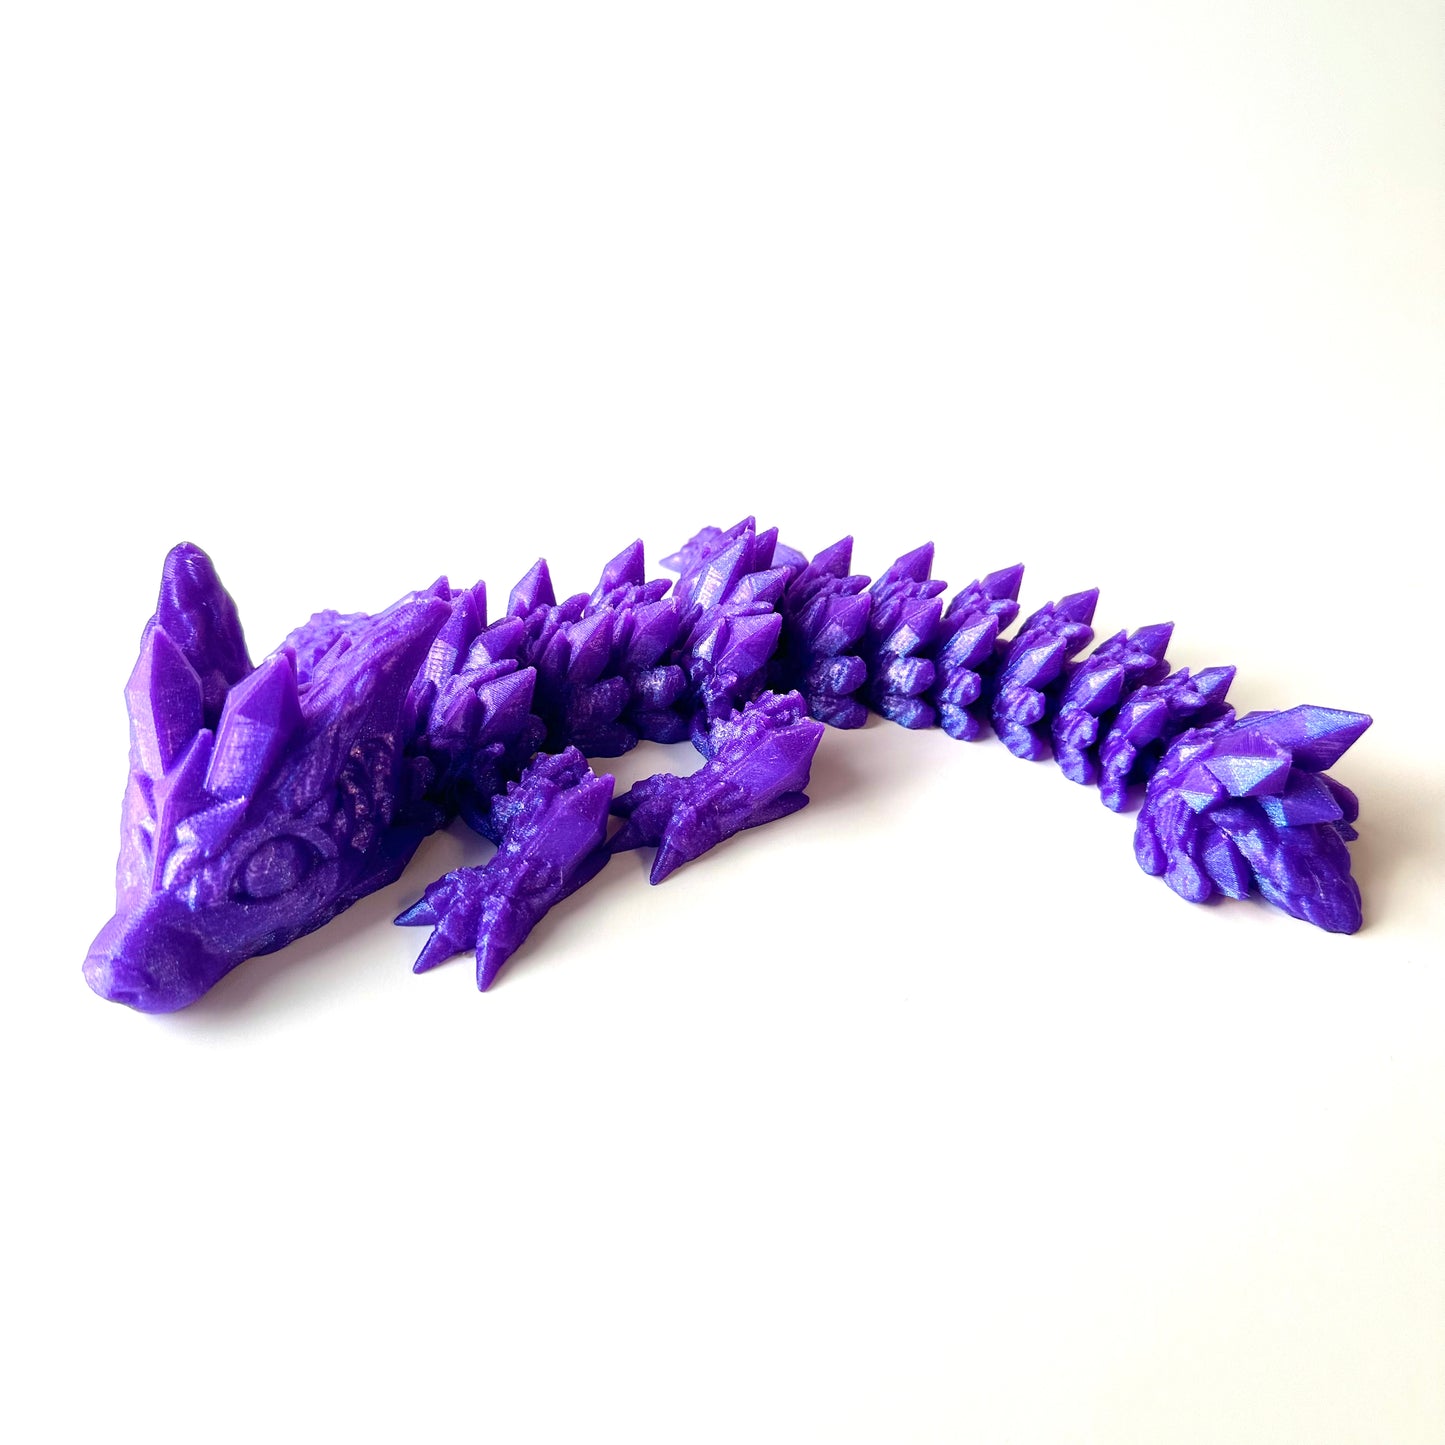 Baby Wolf Dragon - 3D Printed Articulating